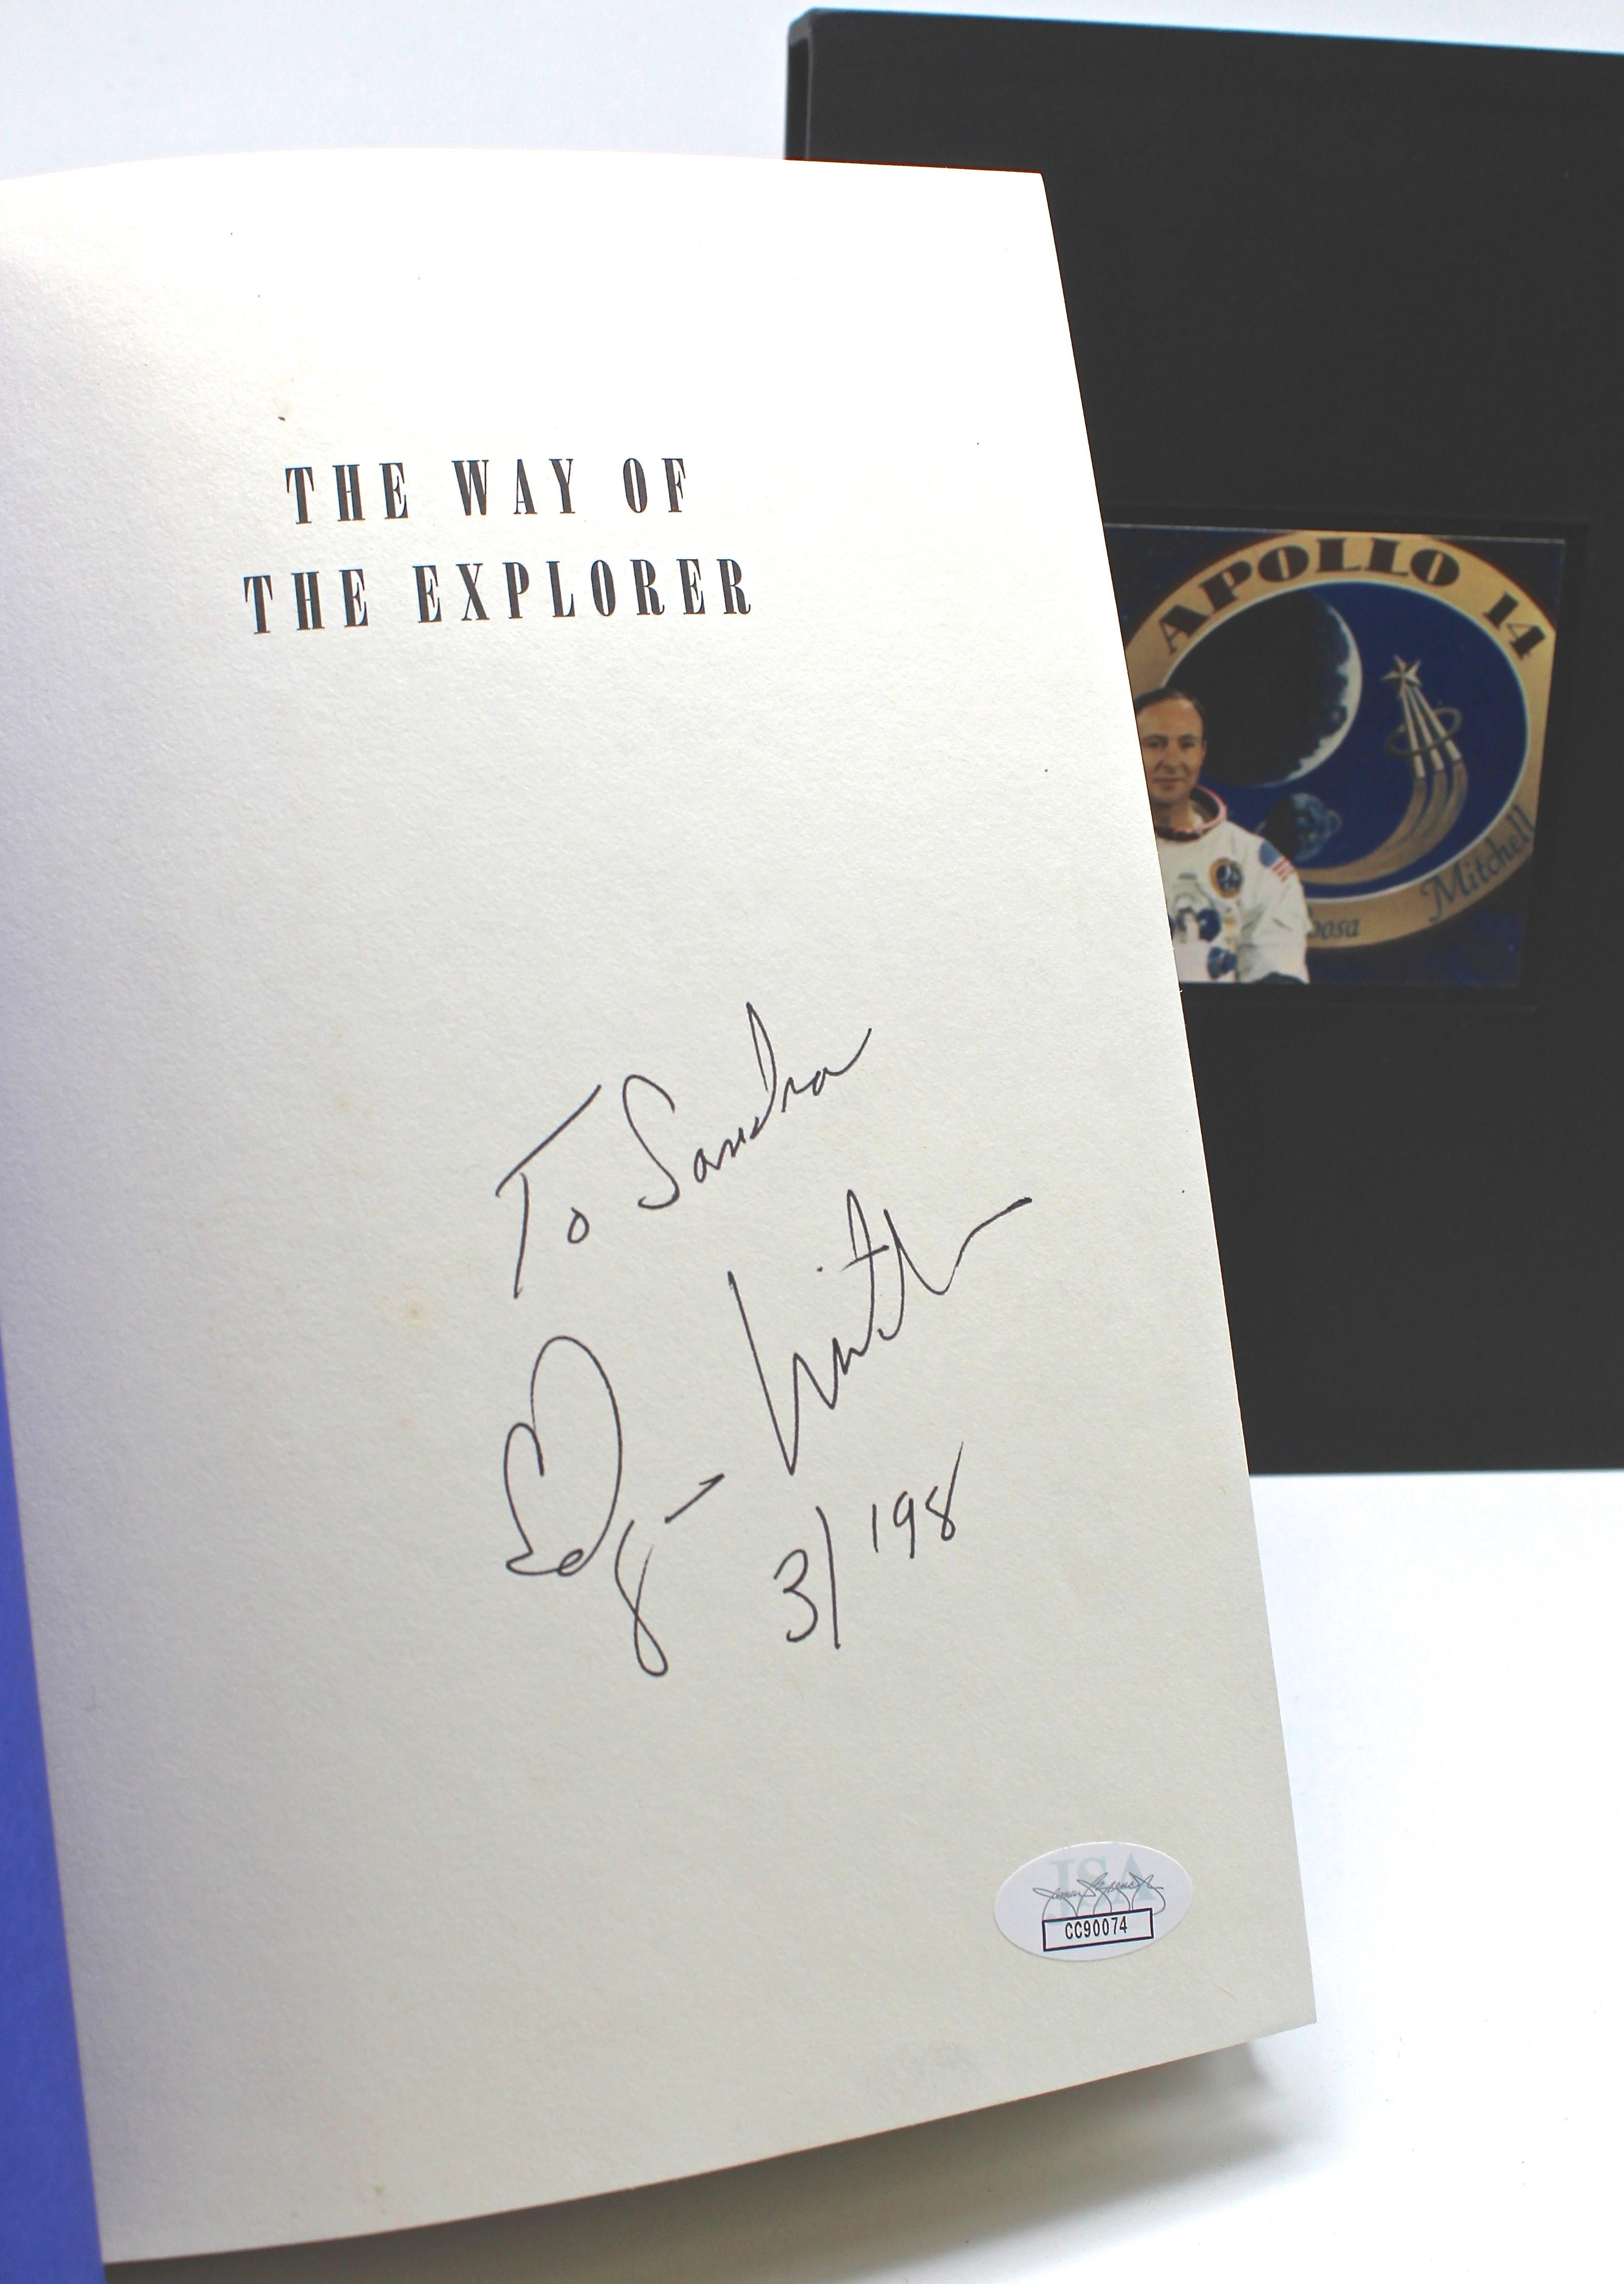 Mitchell, Edgar with Dwight Williams. The Way of the Explorer: An Apollo Astronaut’s Journey Through the Material and Mystical Worlds. New York: G. P. Putnam’s Sons, 1996. Signed by Mitchell, First edition, First printing.

This first edition,